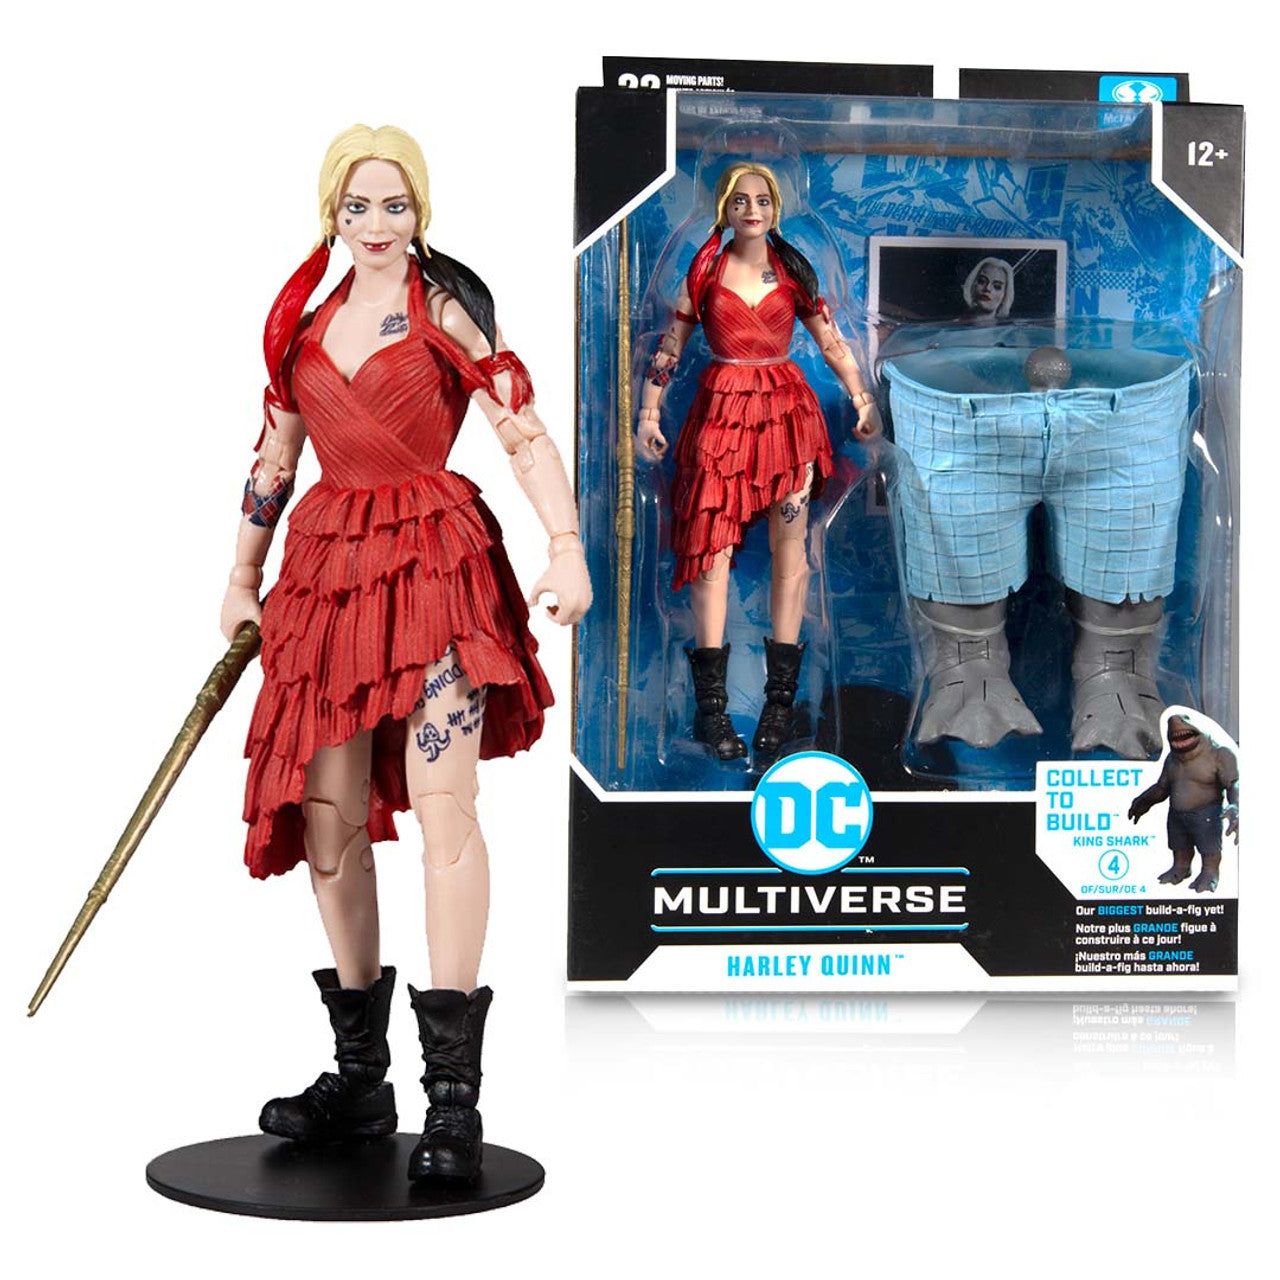 DC Multiverse The Suicide Squad - Harley Quinn 7" scale Action Figure